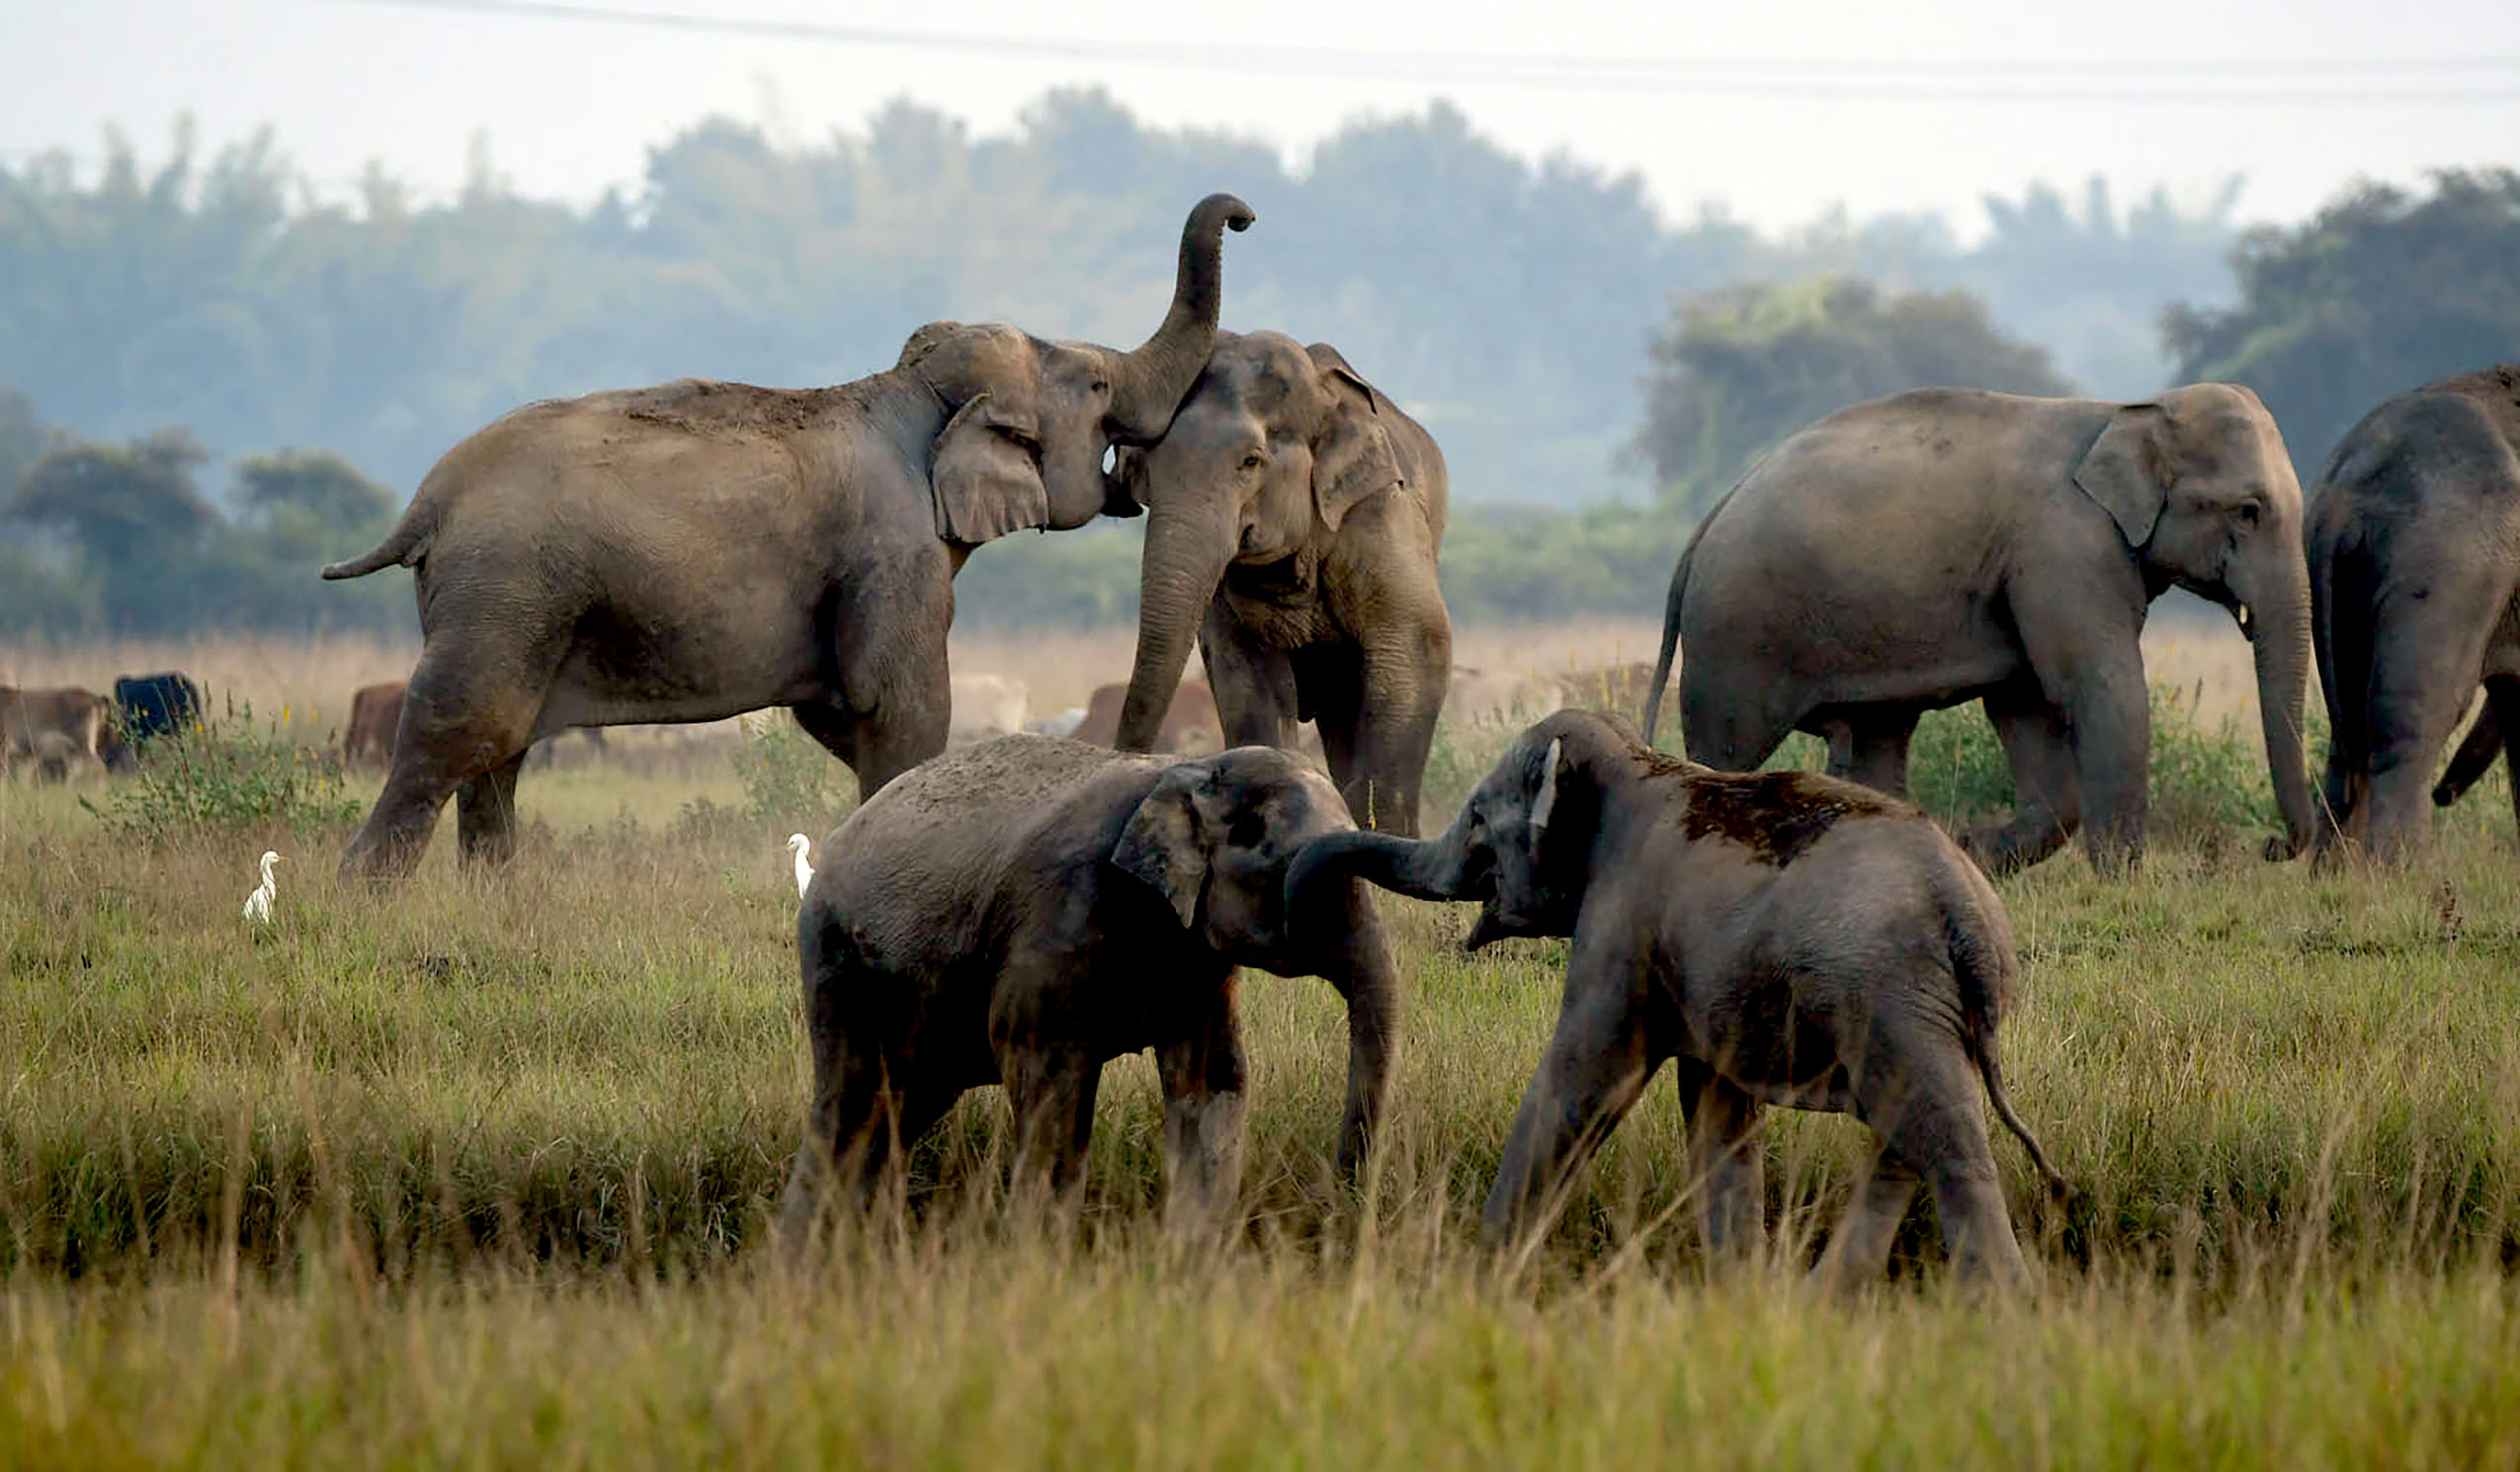 A herd of wild elephants are seen foraging near a village in Nagaon district of India's northeastern state of Assam, Nov. 25, 2022. (Str/Xinhua)